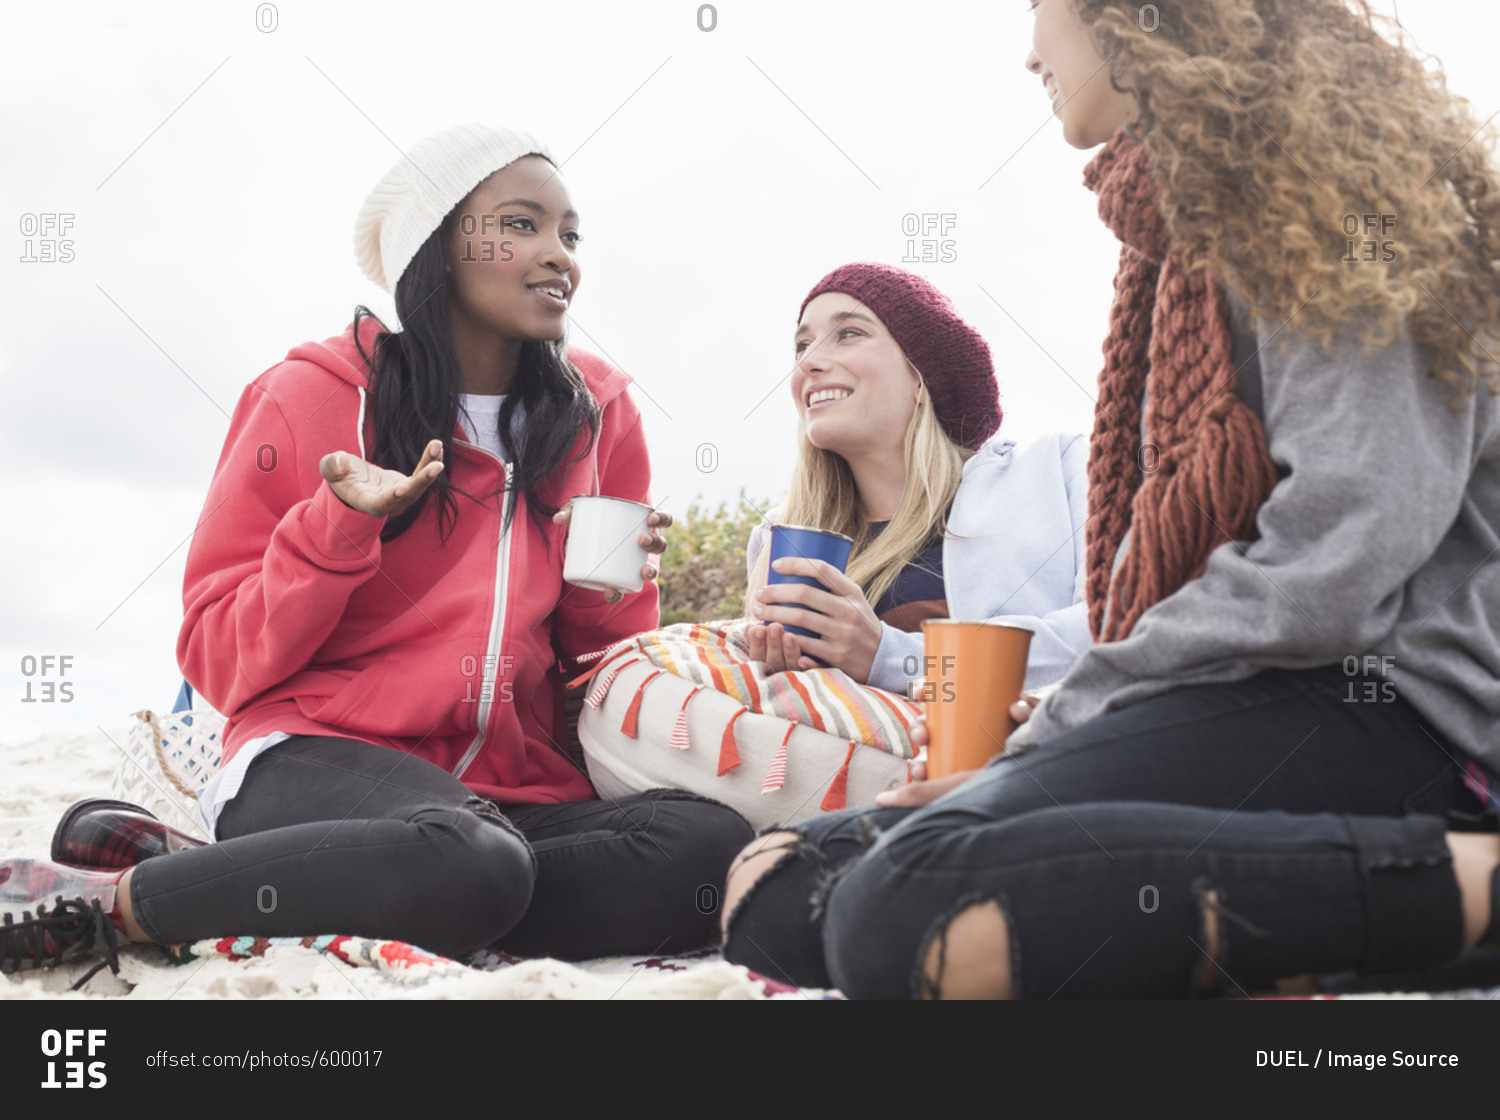 Three young women chatting on beach picnic, Western Cape, South Africa